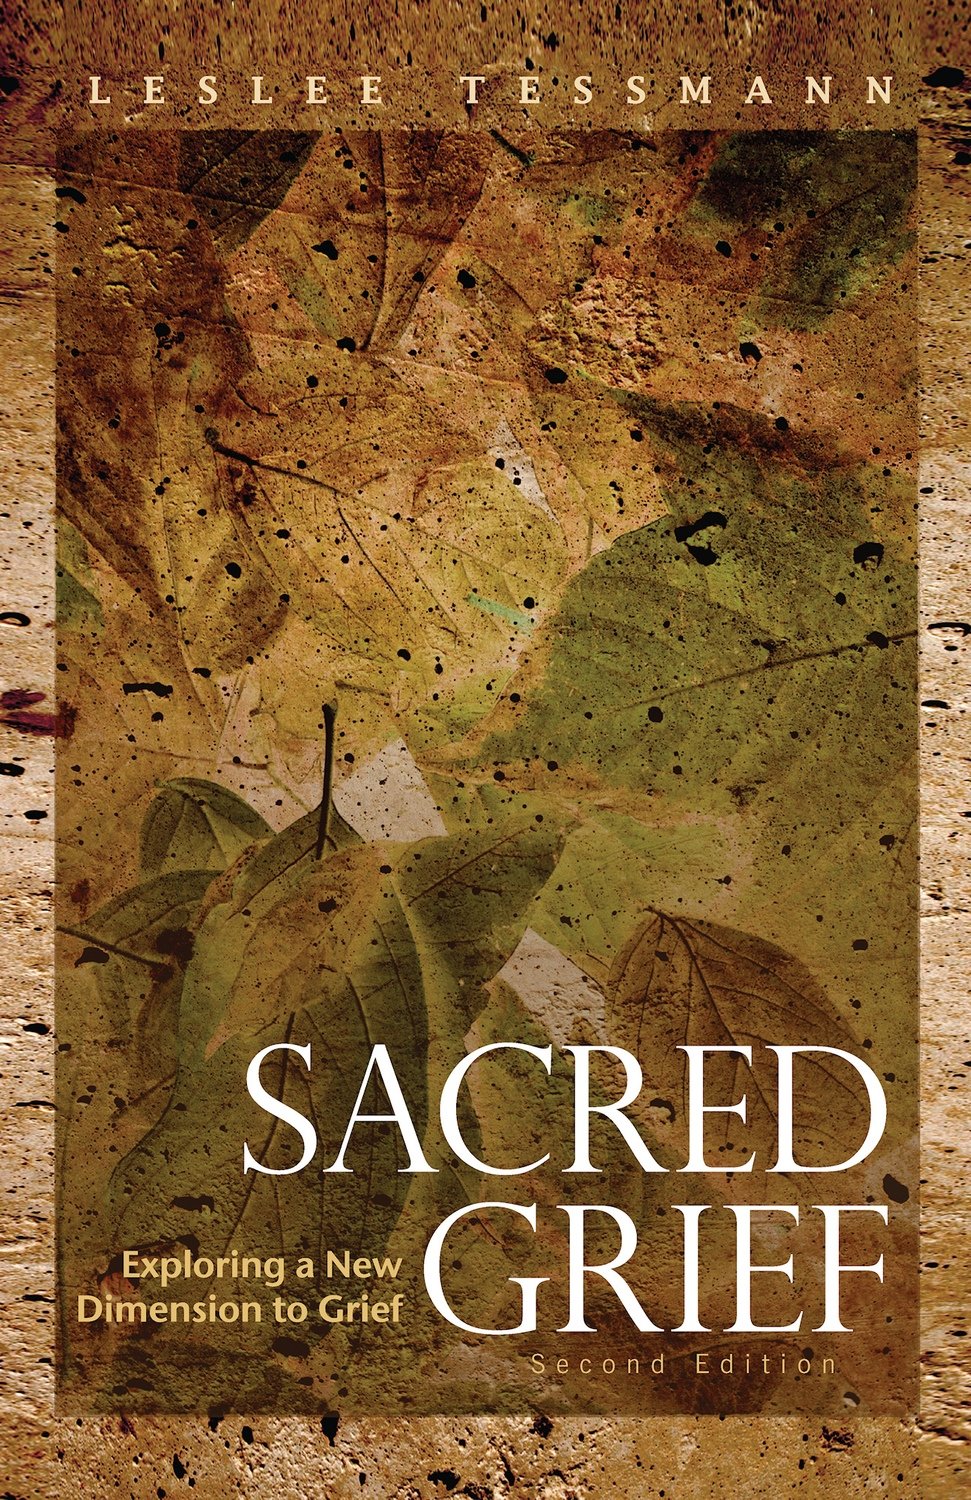 Sacred Grief: Exploring A New Dimension to Grief